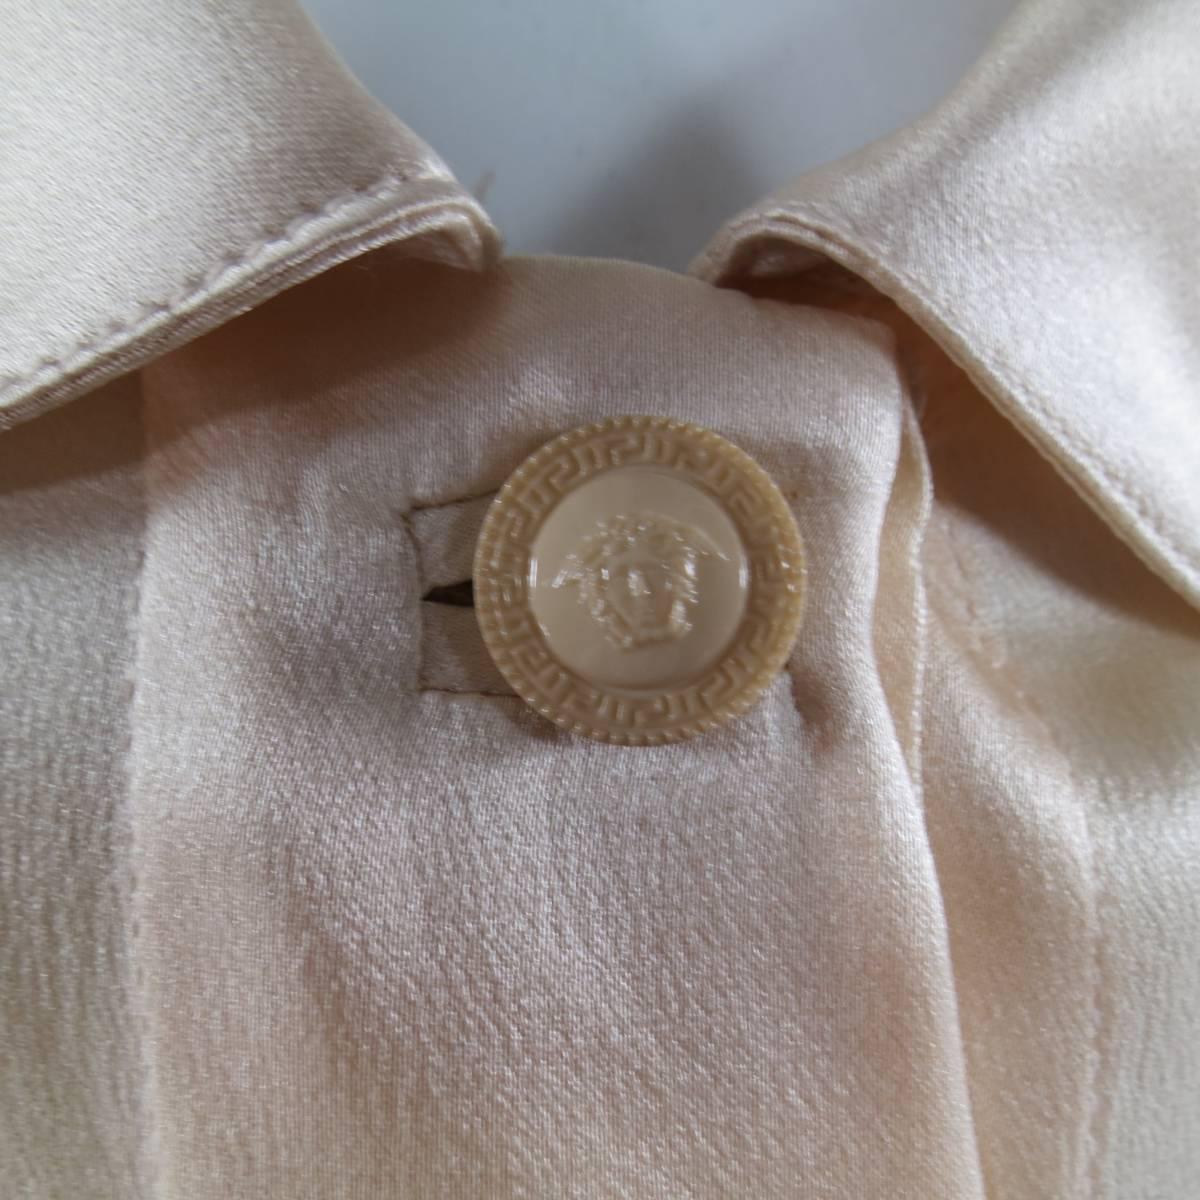 This gorgeous GIANNI VERSACE blouse comes in a light peachy nude silk satin and features a curved collar with matching Medusa button, hidden placket buttopn closure and French cuffs. Made in Italy.
 
Excellent Pre-Owned Condition.
Marked: 38
